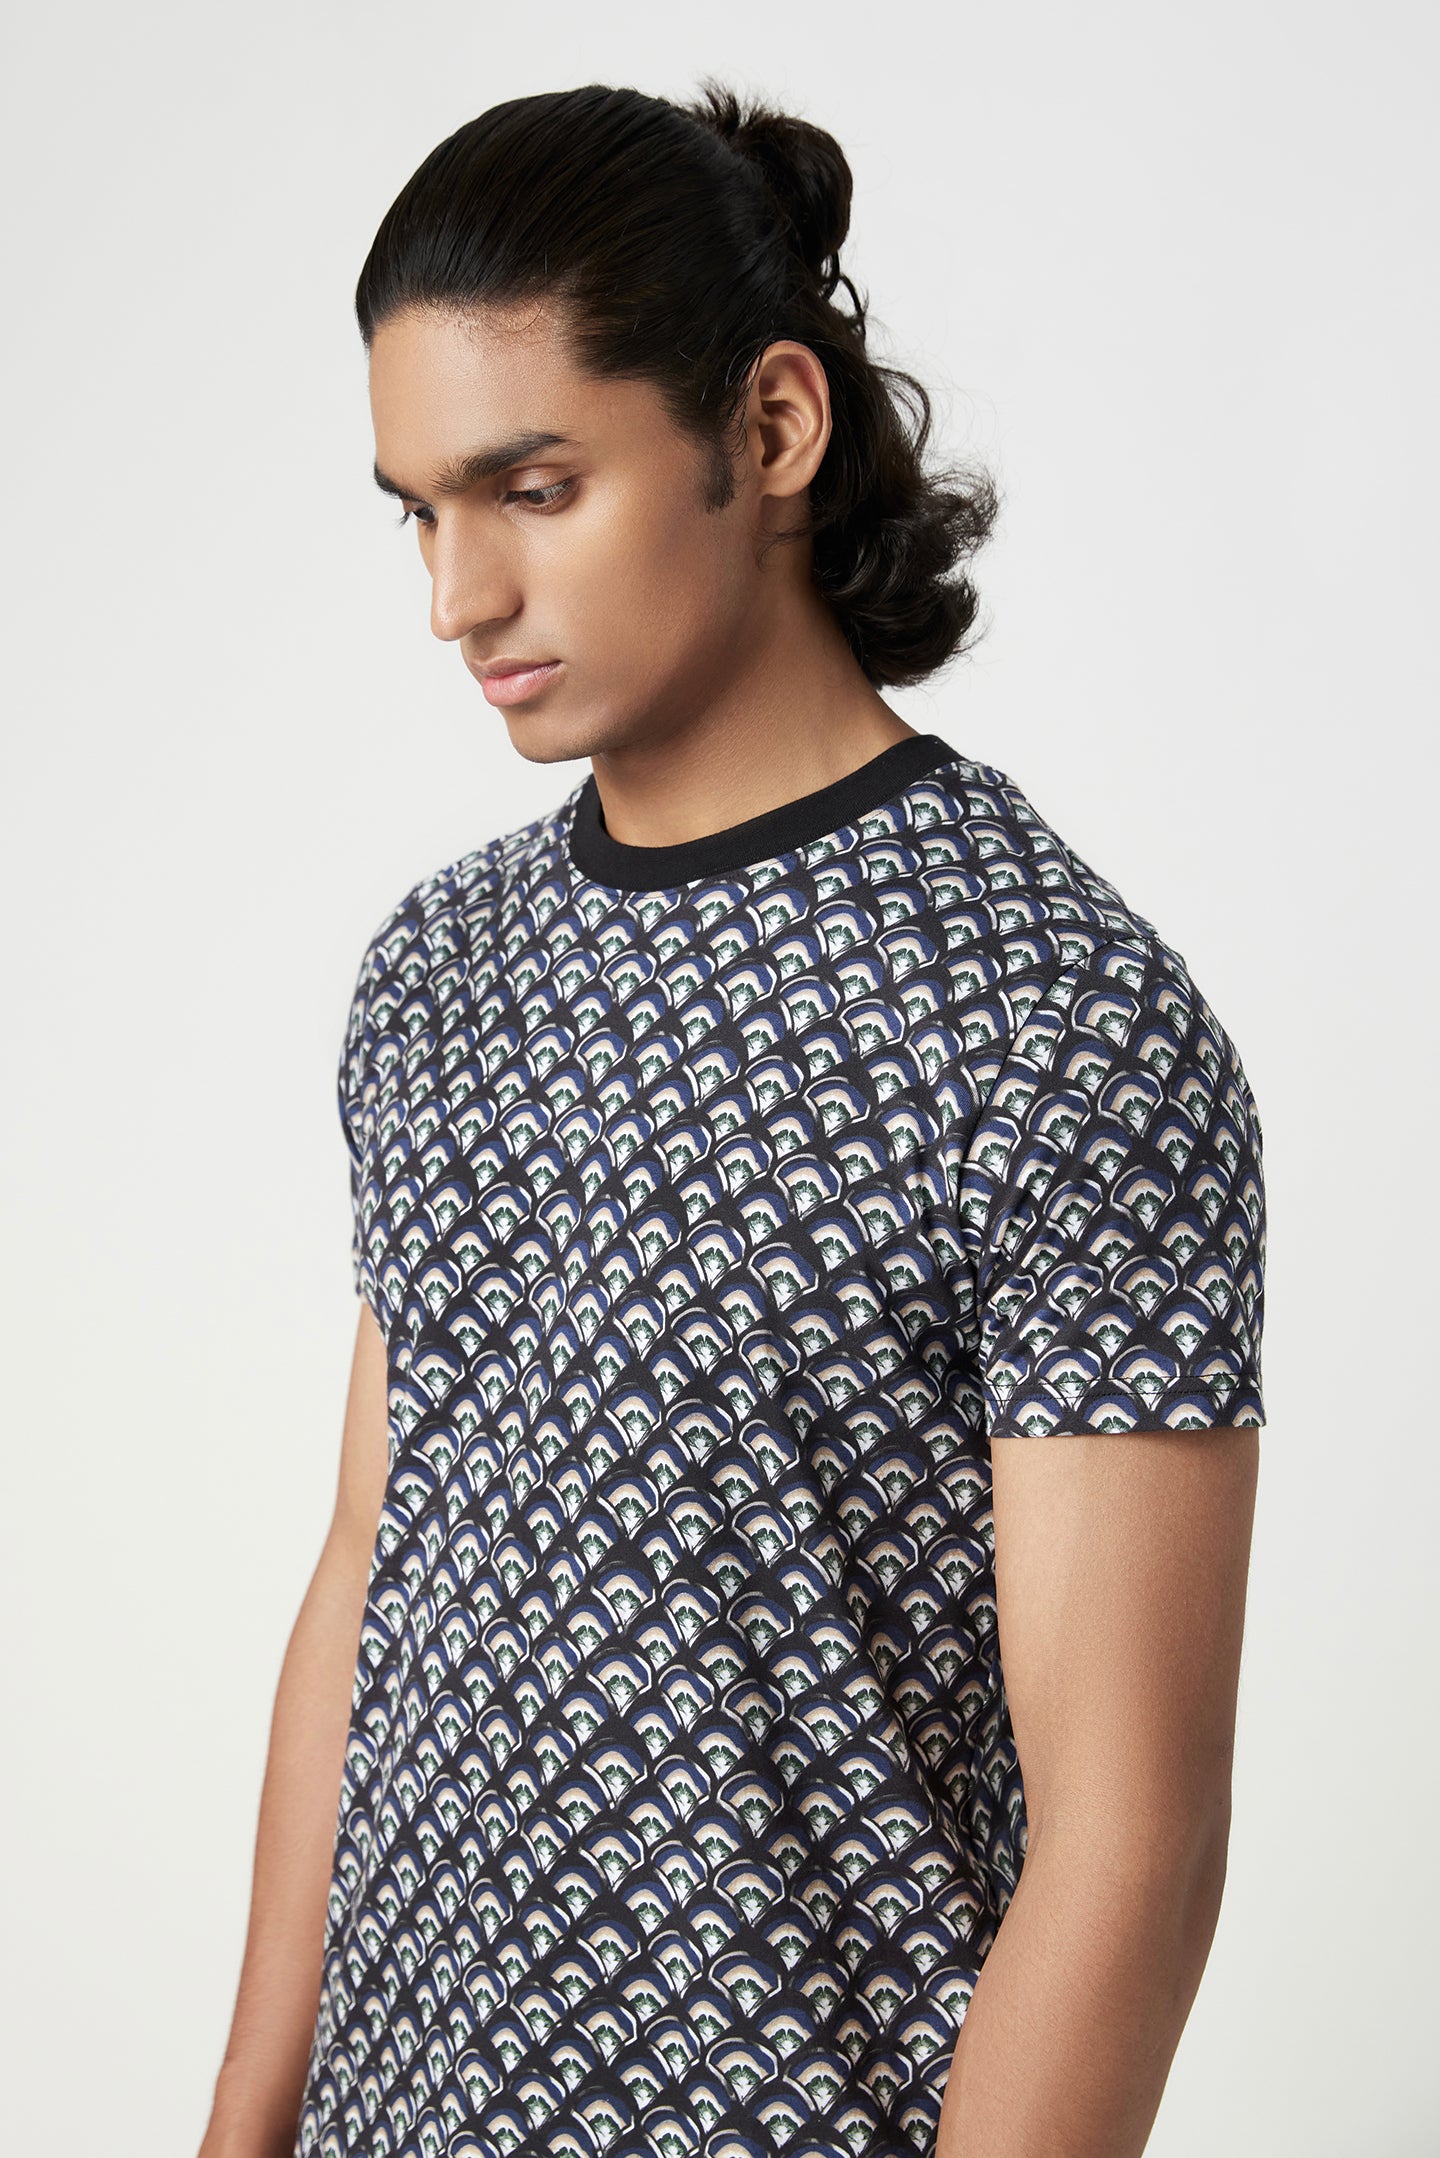 Regular Fit T-Shirt in All-Over Scallop Print